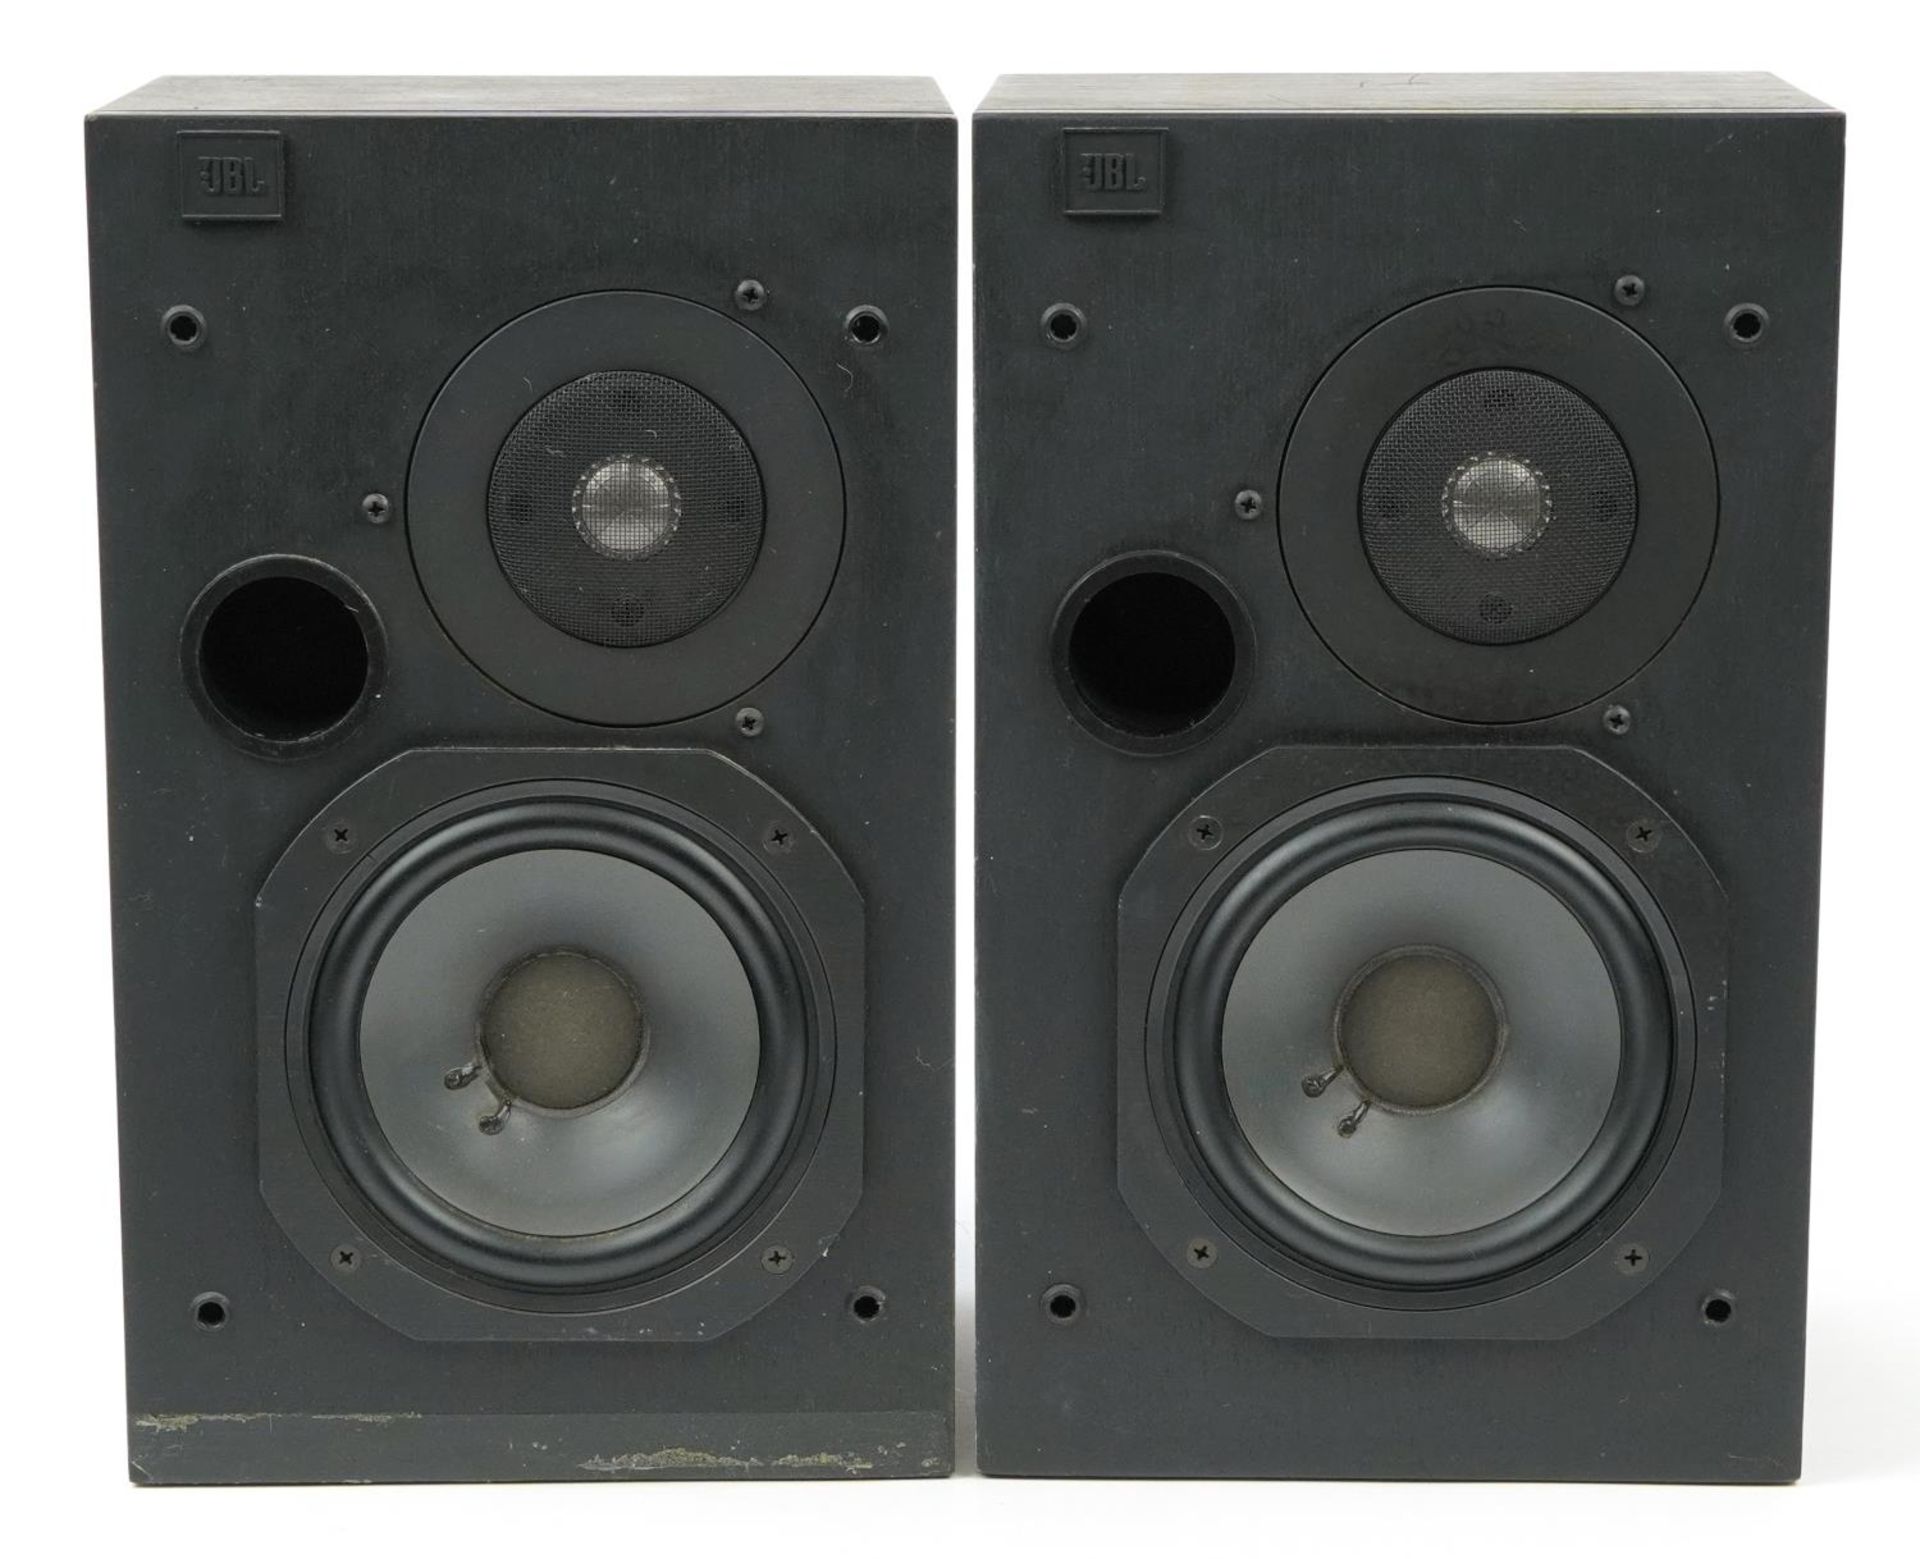 Pair of JBL18Ti shelf speakers, 39.5cm high : For further information on this lot please contact the - Image 2 of 4